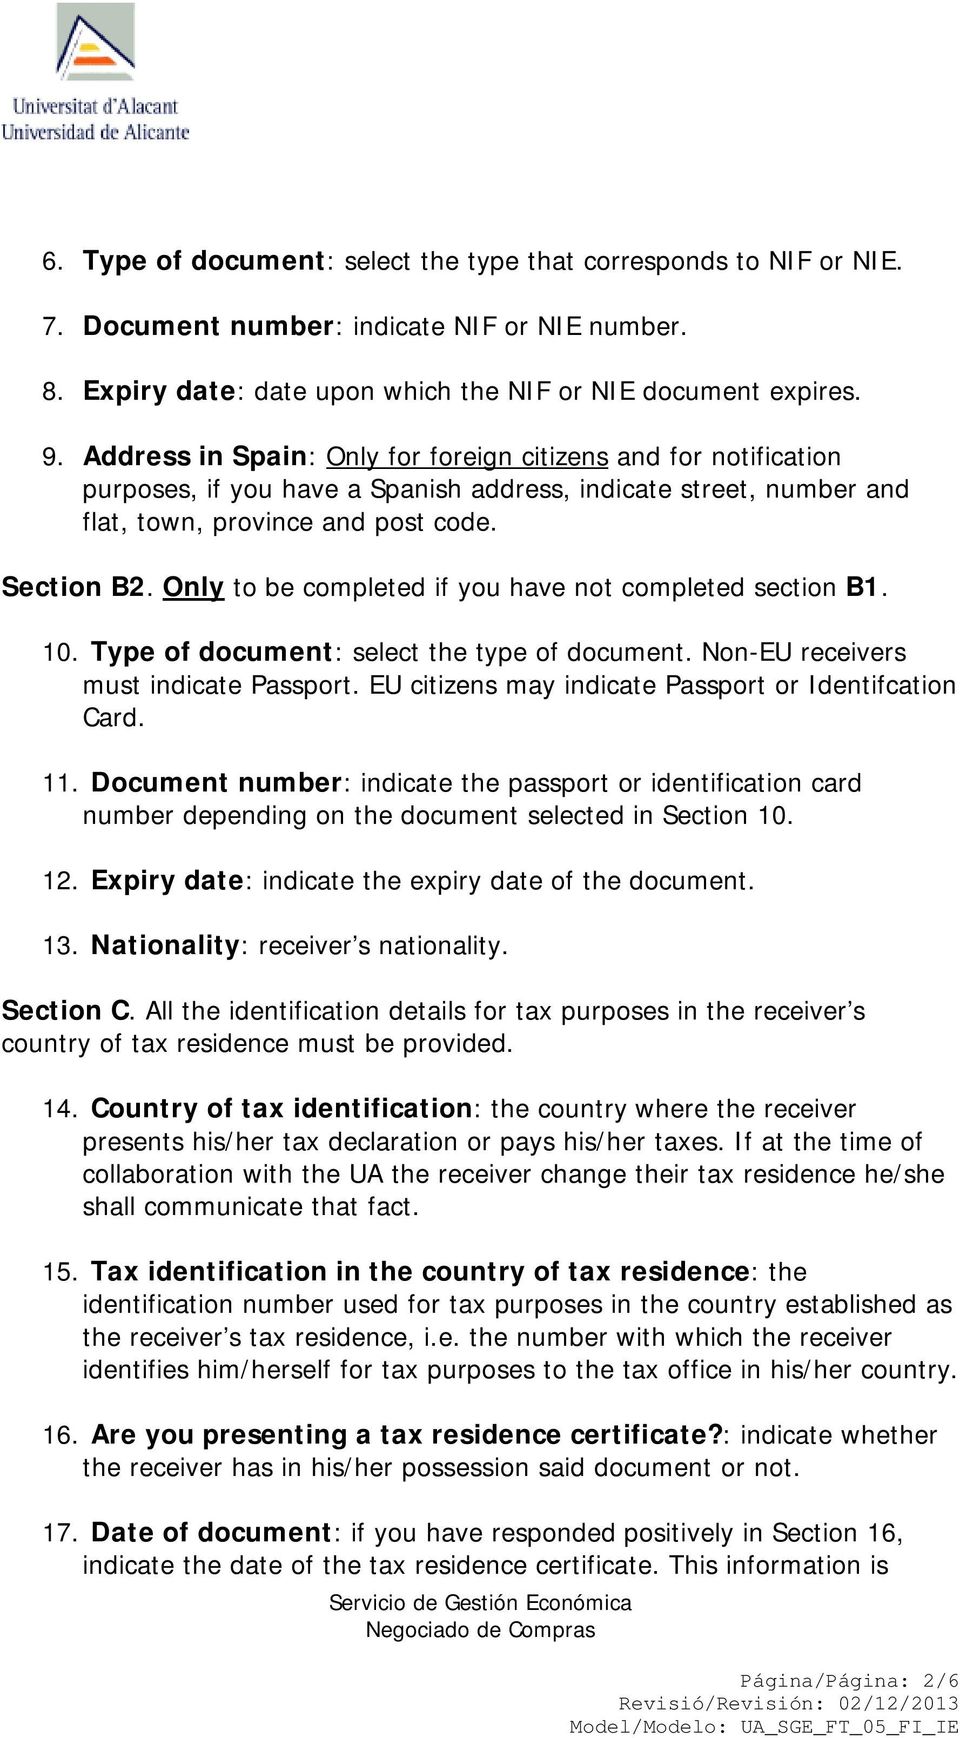 Only to be completed if you have not completed section B1. 10. Type of document: select the type of document. Non-EU receivers must indicate Passport.